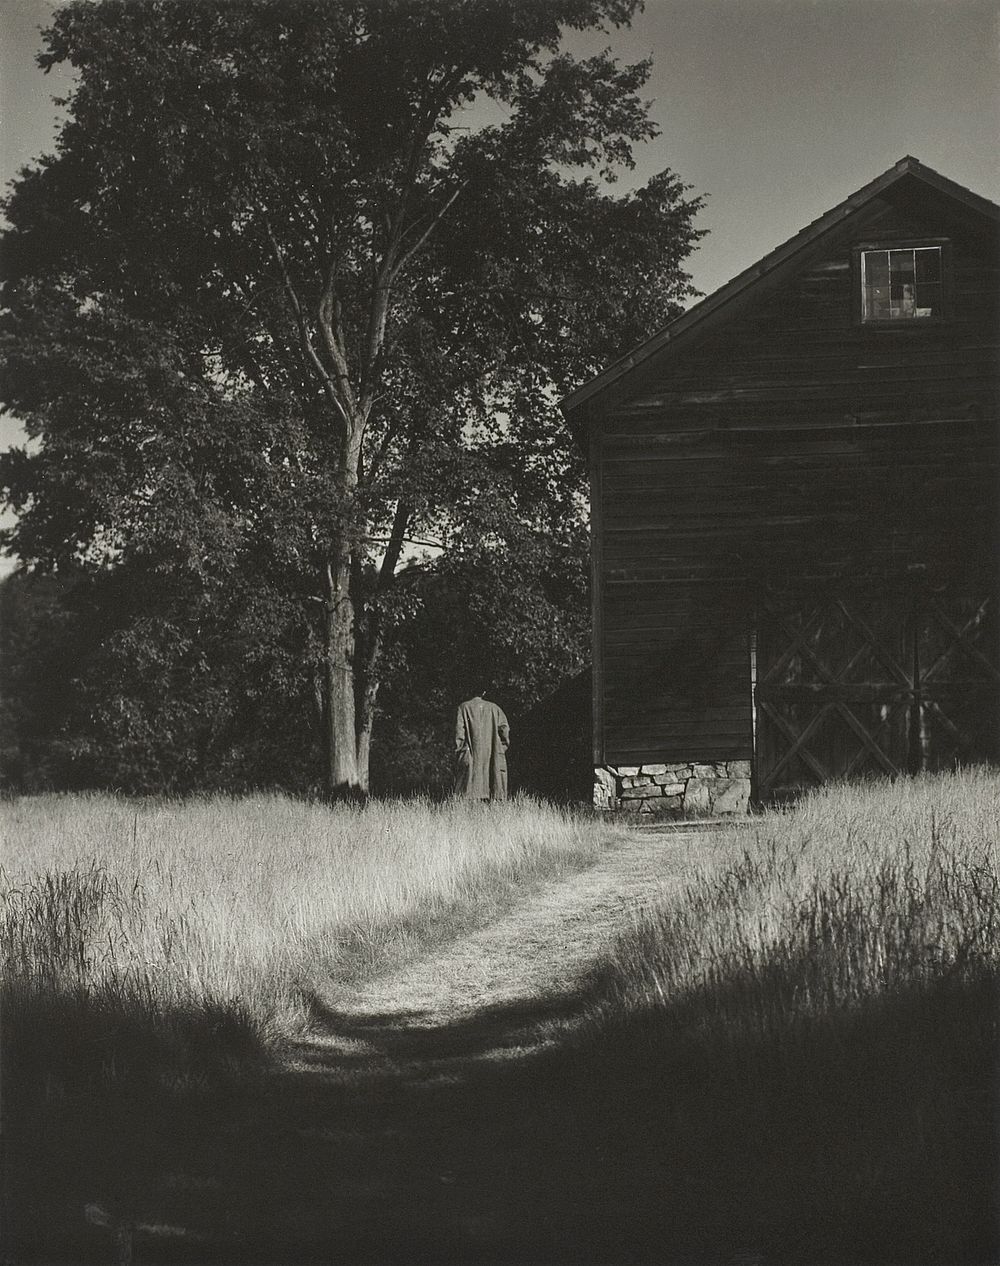 Barn, Lake George (1936) by Alfred Stieglitz. Original from The Art Institute of Chicago. Digitally enhanced by rawpixel.